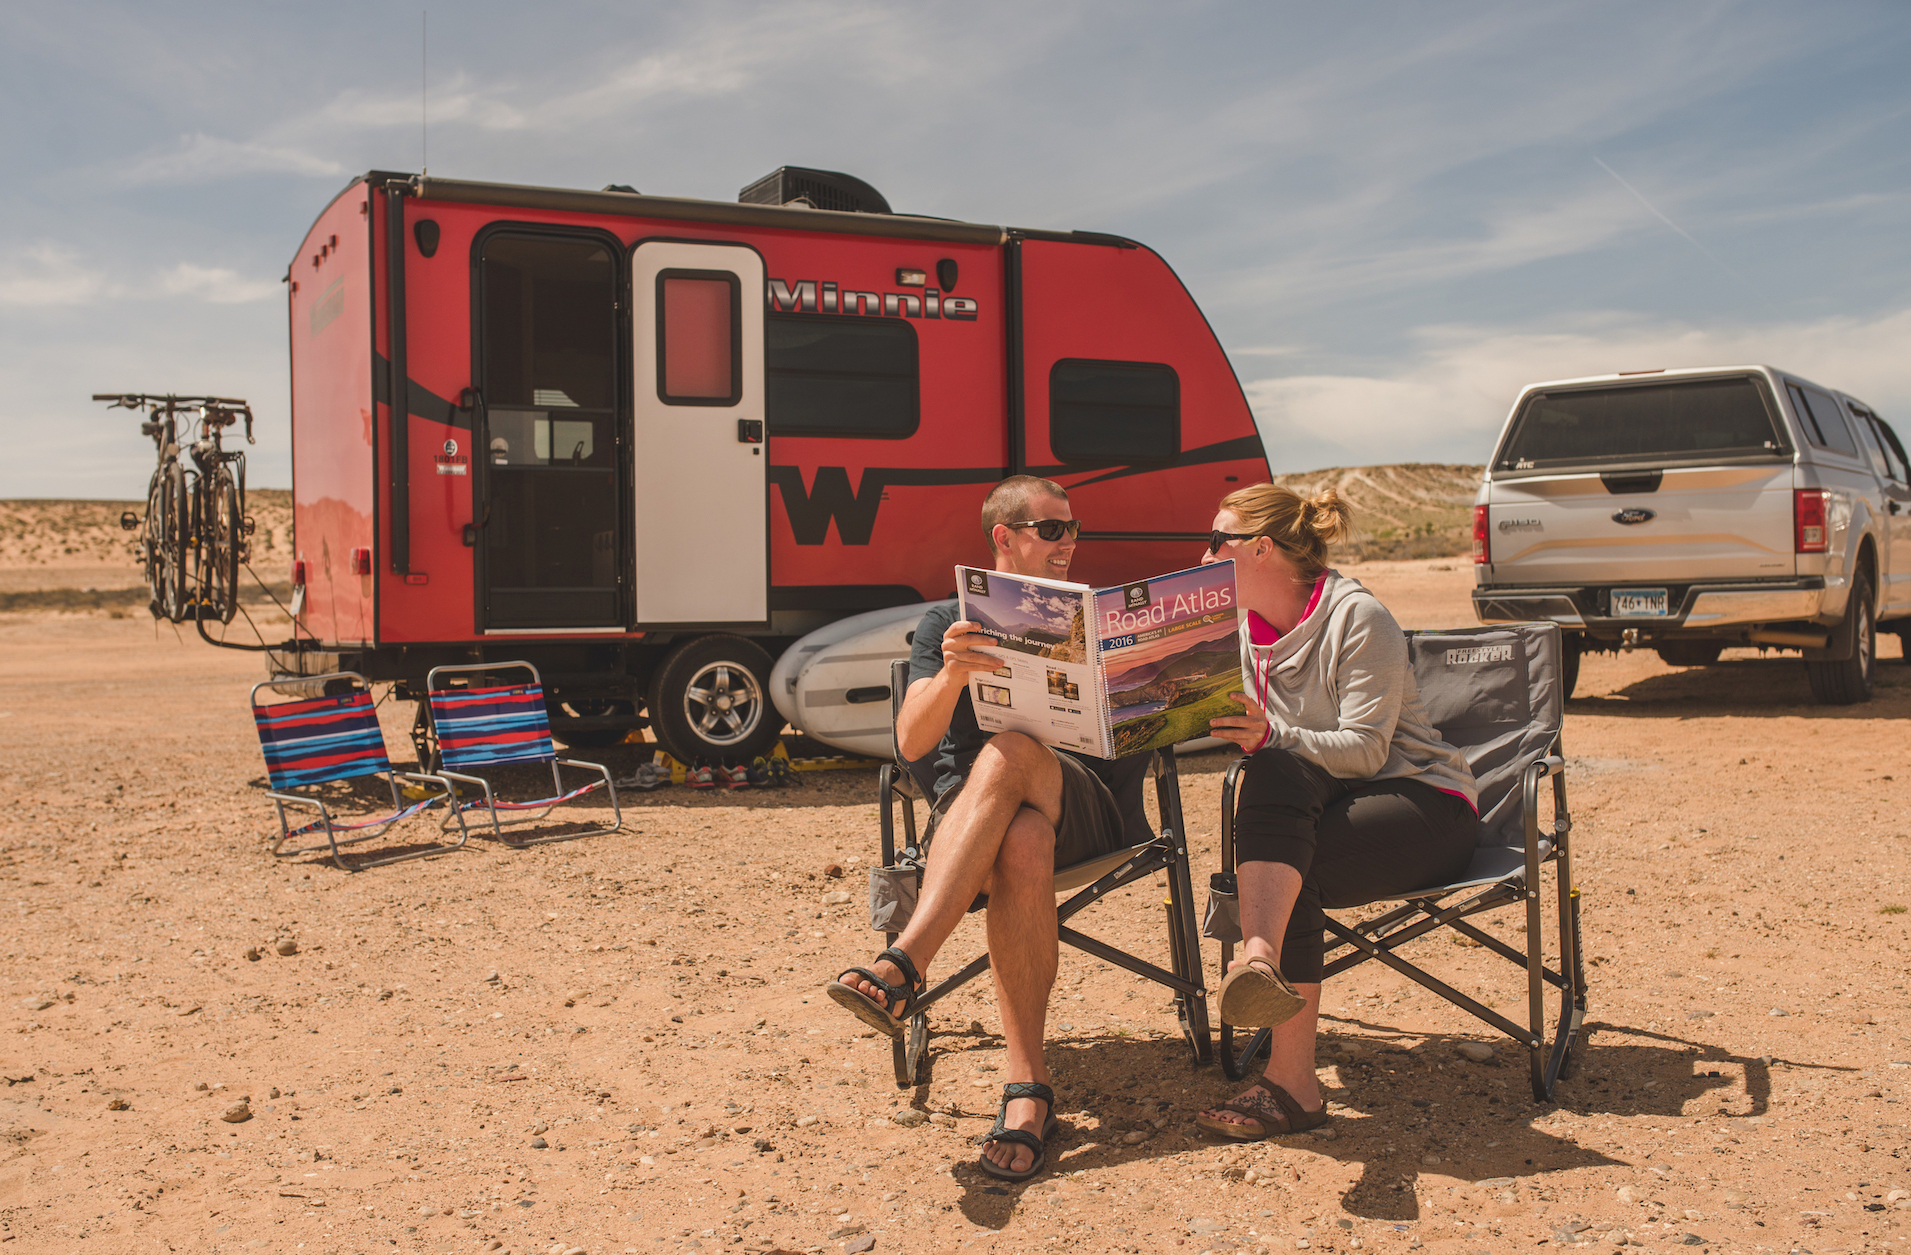 Sales of travel-trailers towable by a pickup or SUV grew 10% in February 2017. The Laughlins represent a trend.